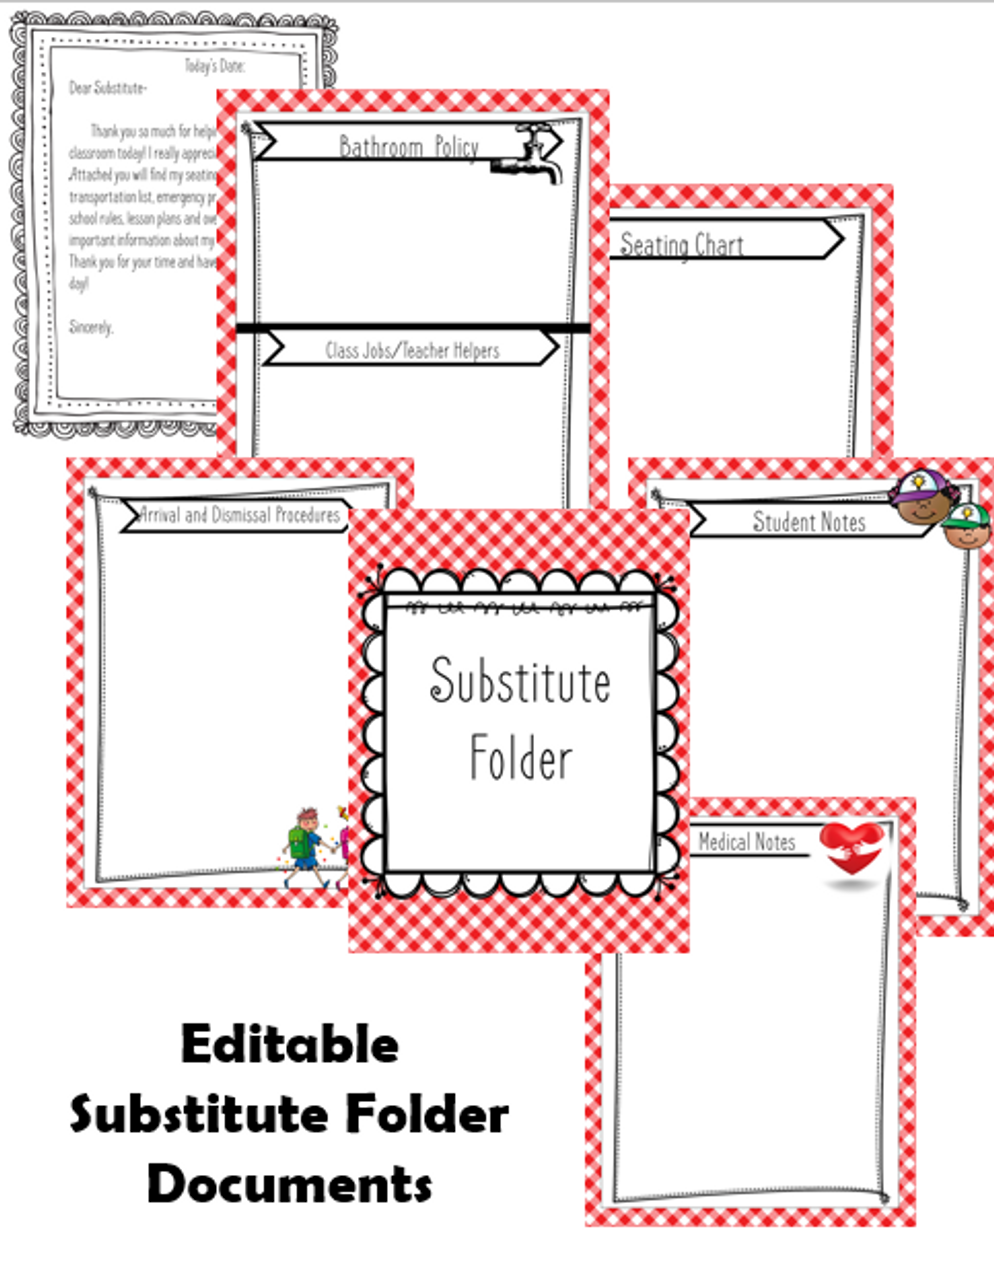 Emergency Substitute Plans Template and Editable Sub Folder- FREE